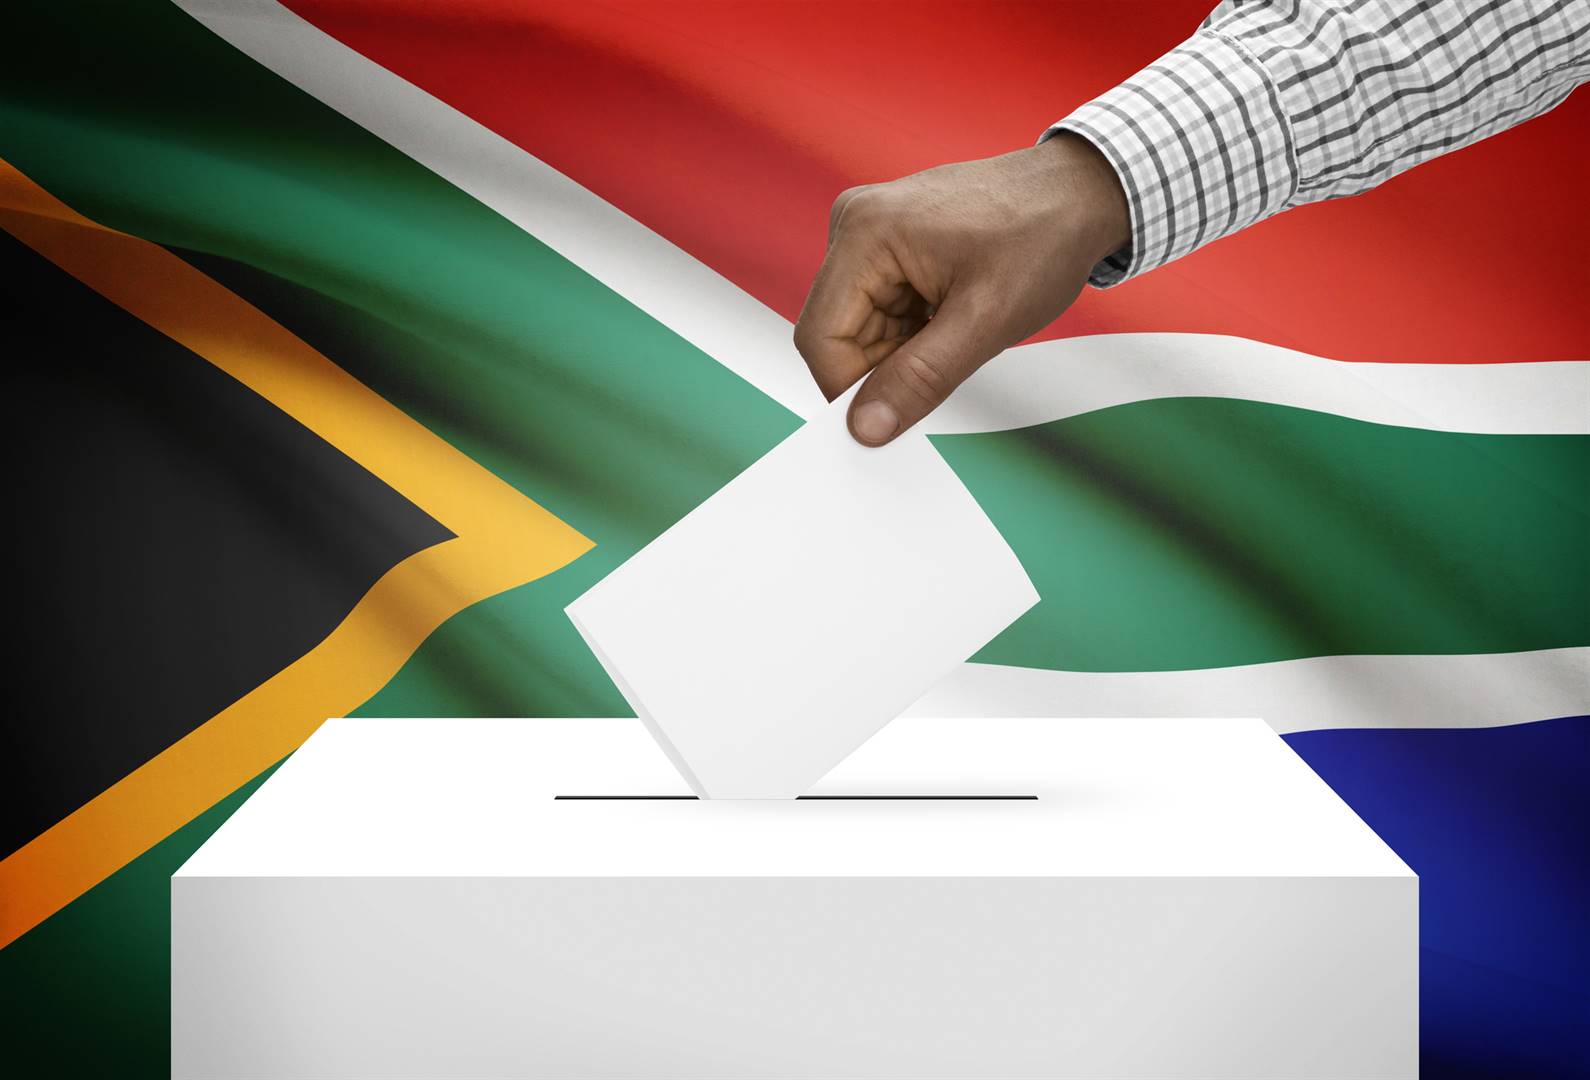 Choose wisely on 29 May, whether voting at national or provincial levels, or for an independent candidate, we must cast our votes for the option that will most benefit the poor and the marginalised. 